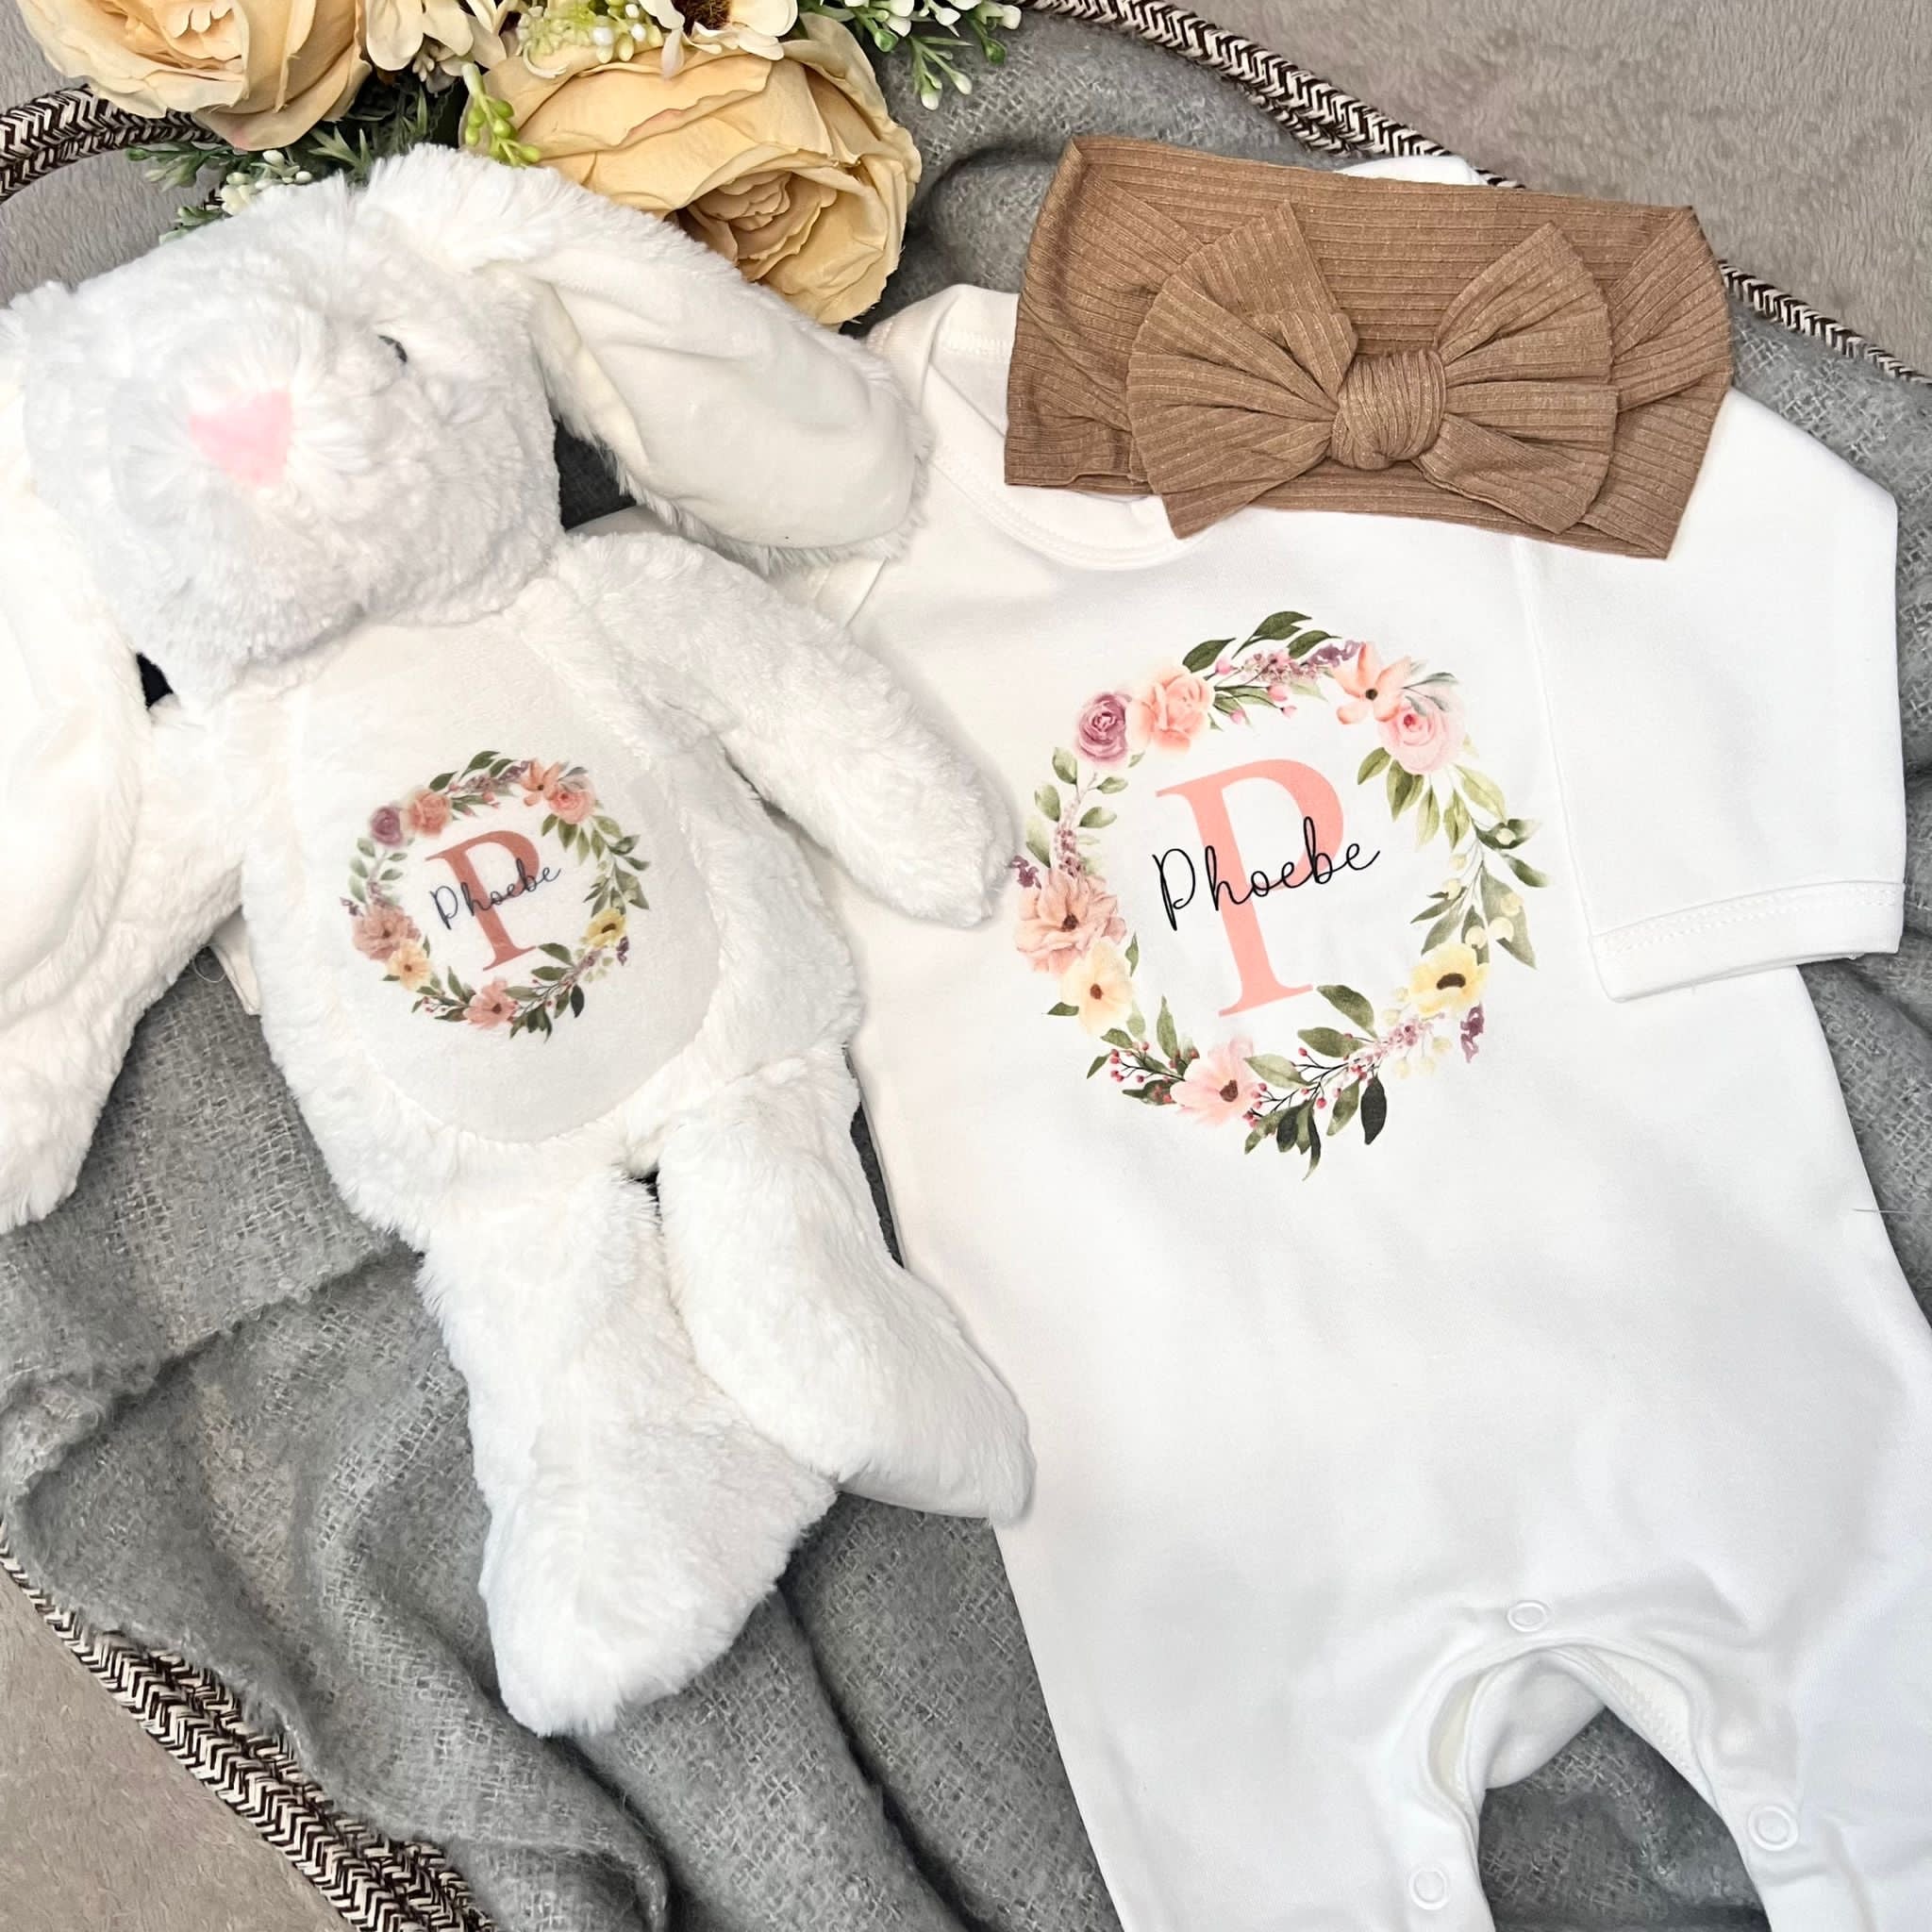 New Baby Gift Set - Floral Wreath Initial Design